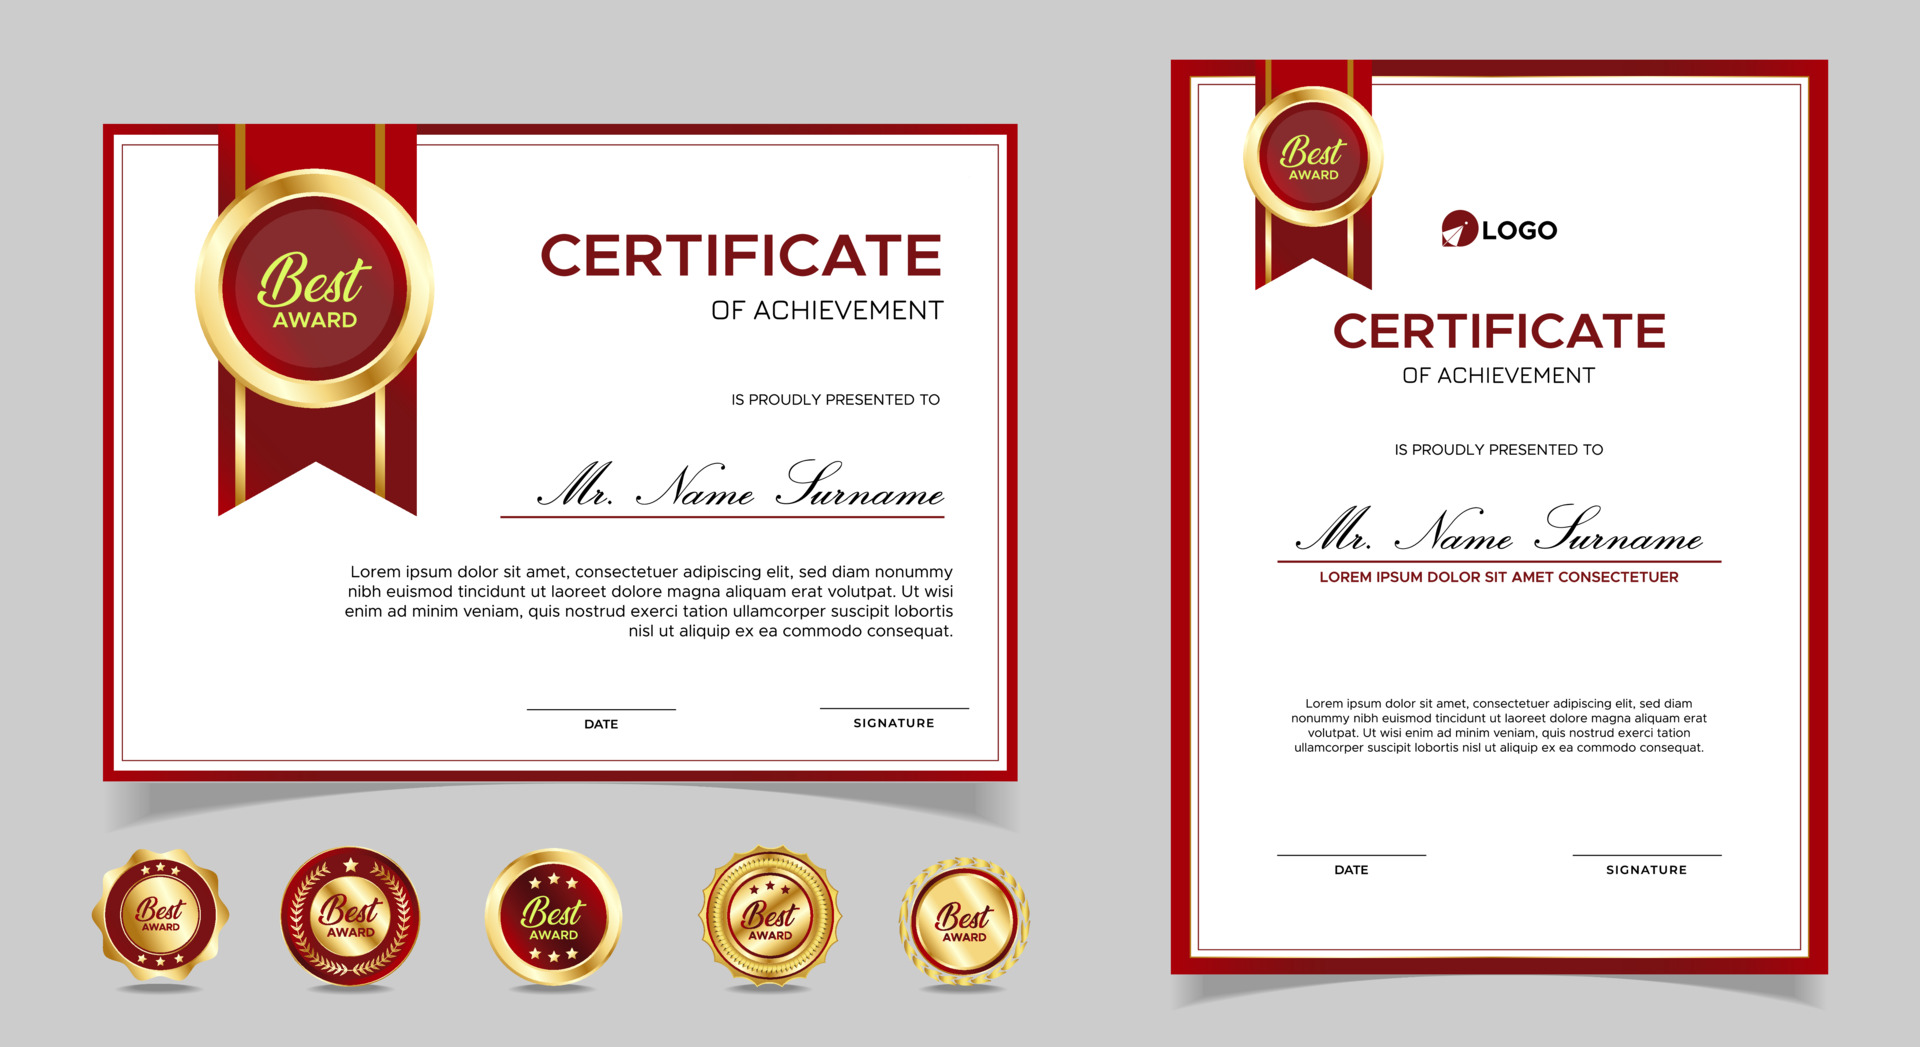 Certificate of appreciation template, gold and red color. Clean Inside Award Certificate Border Template